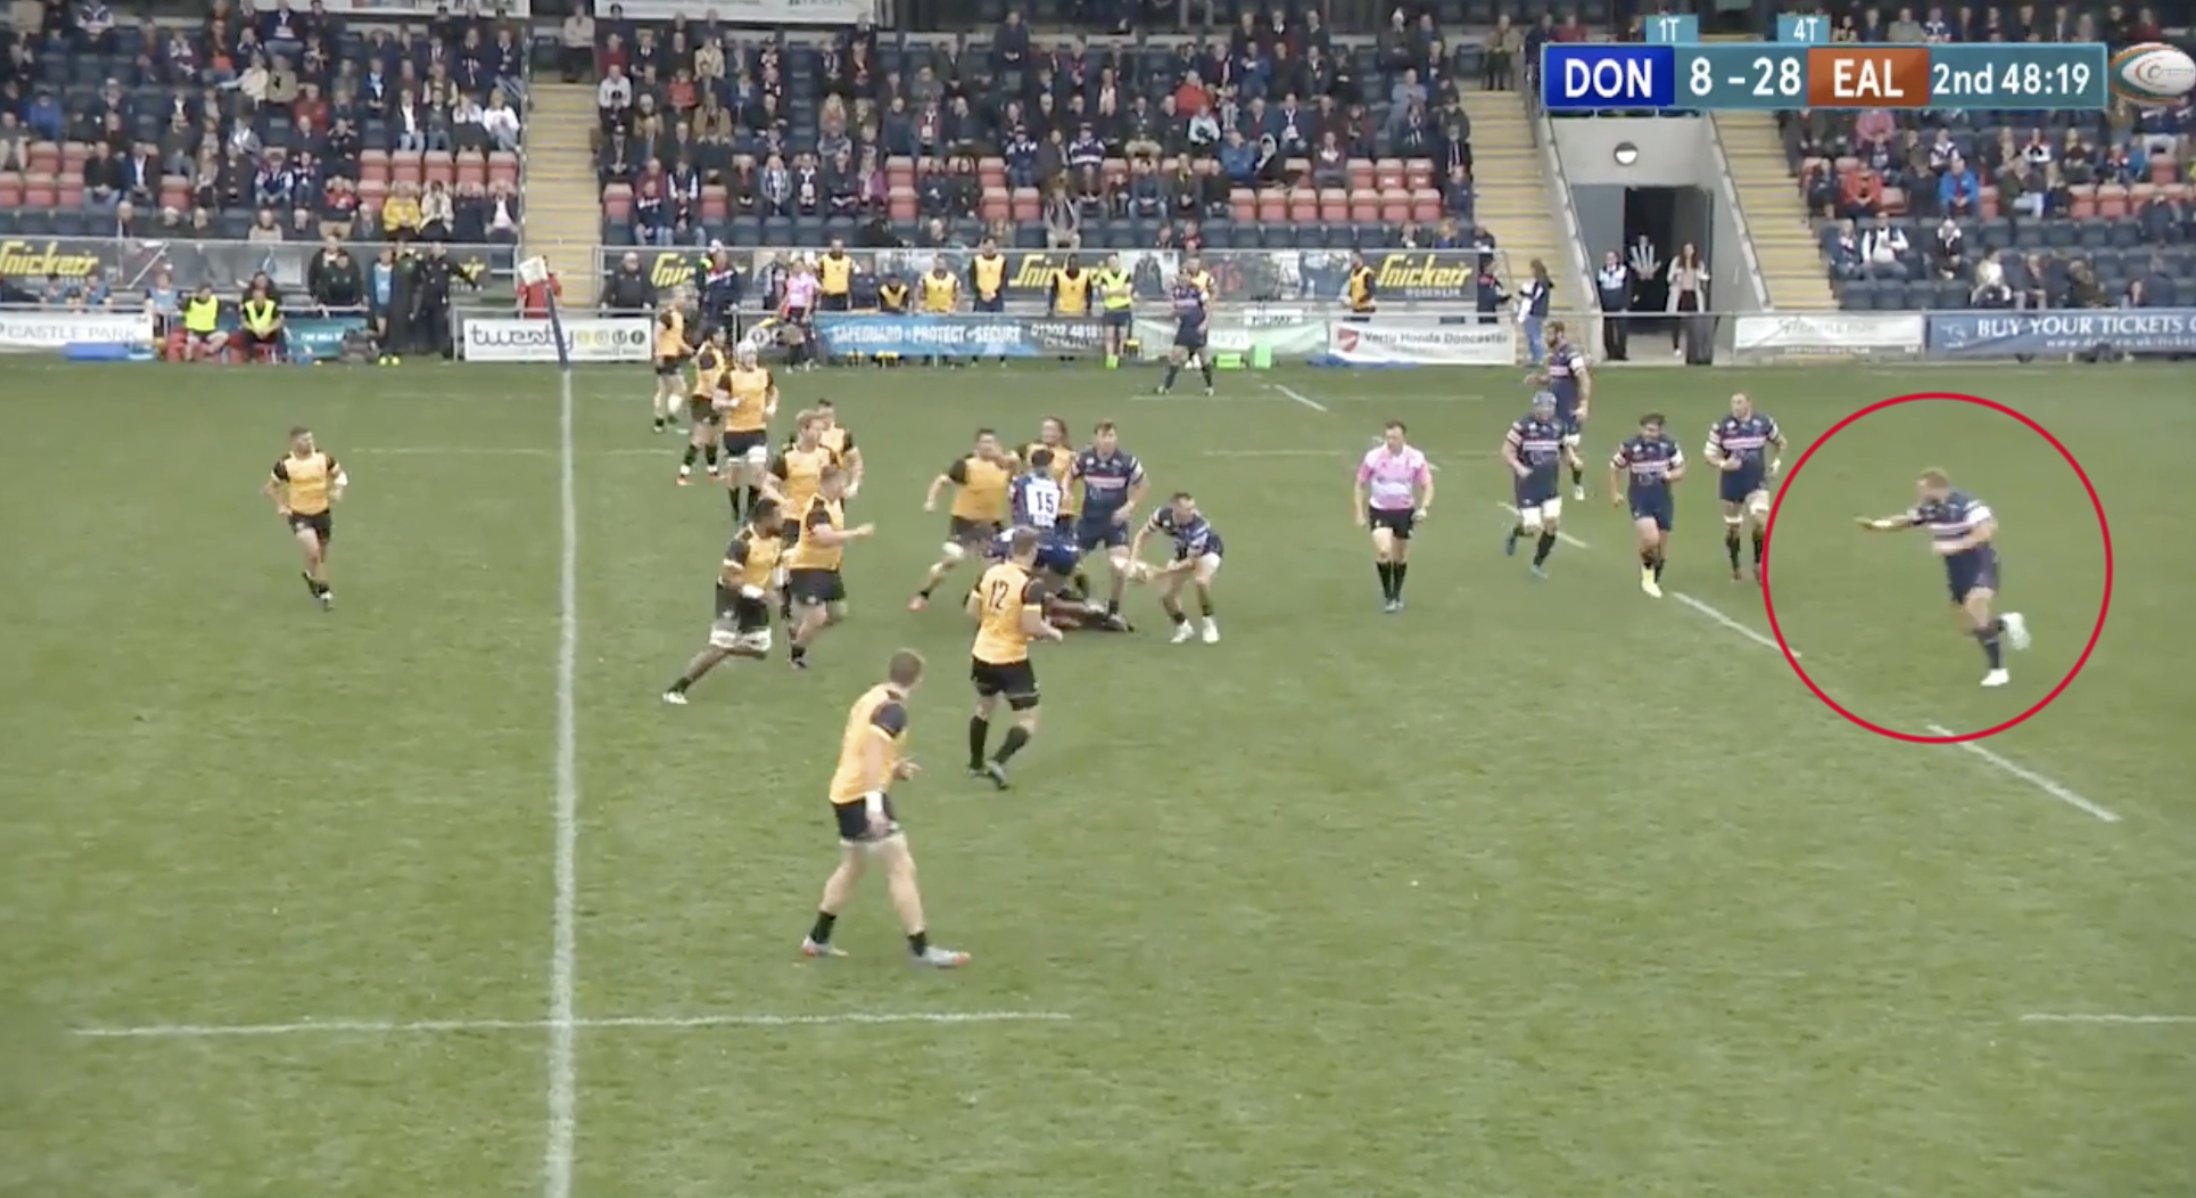 FOOTAGE: 6ft 3, 145kg Doncaster Prop leaves nothing but misery and destruction in his wake with bulldozing run